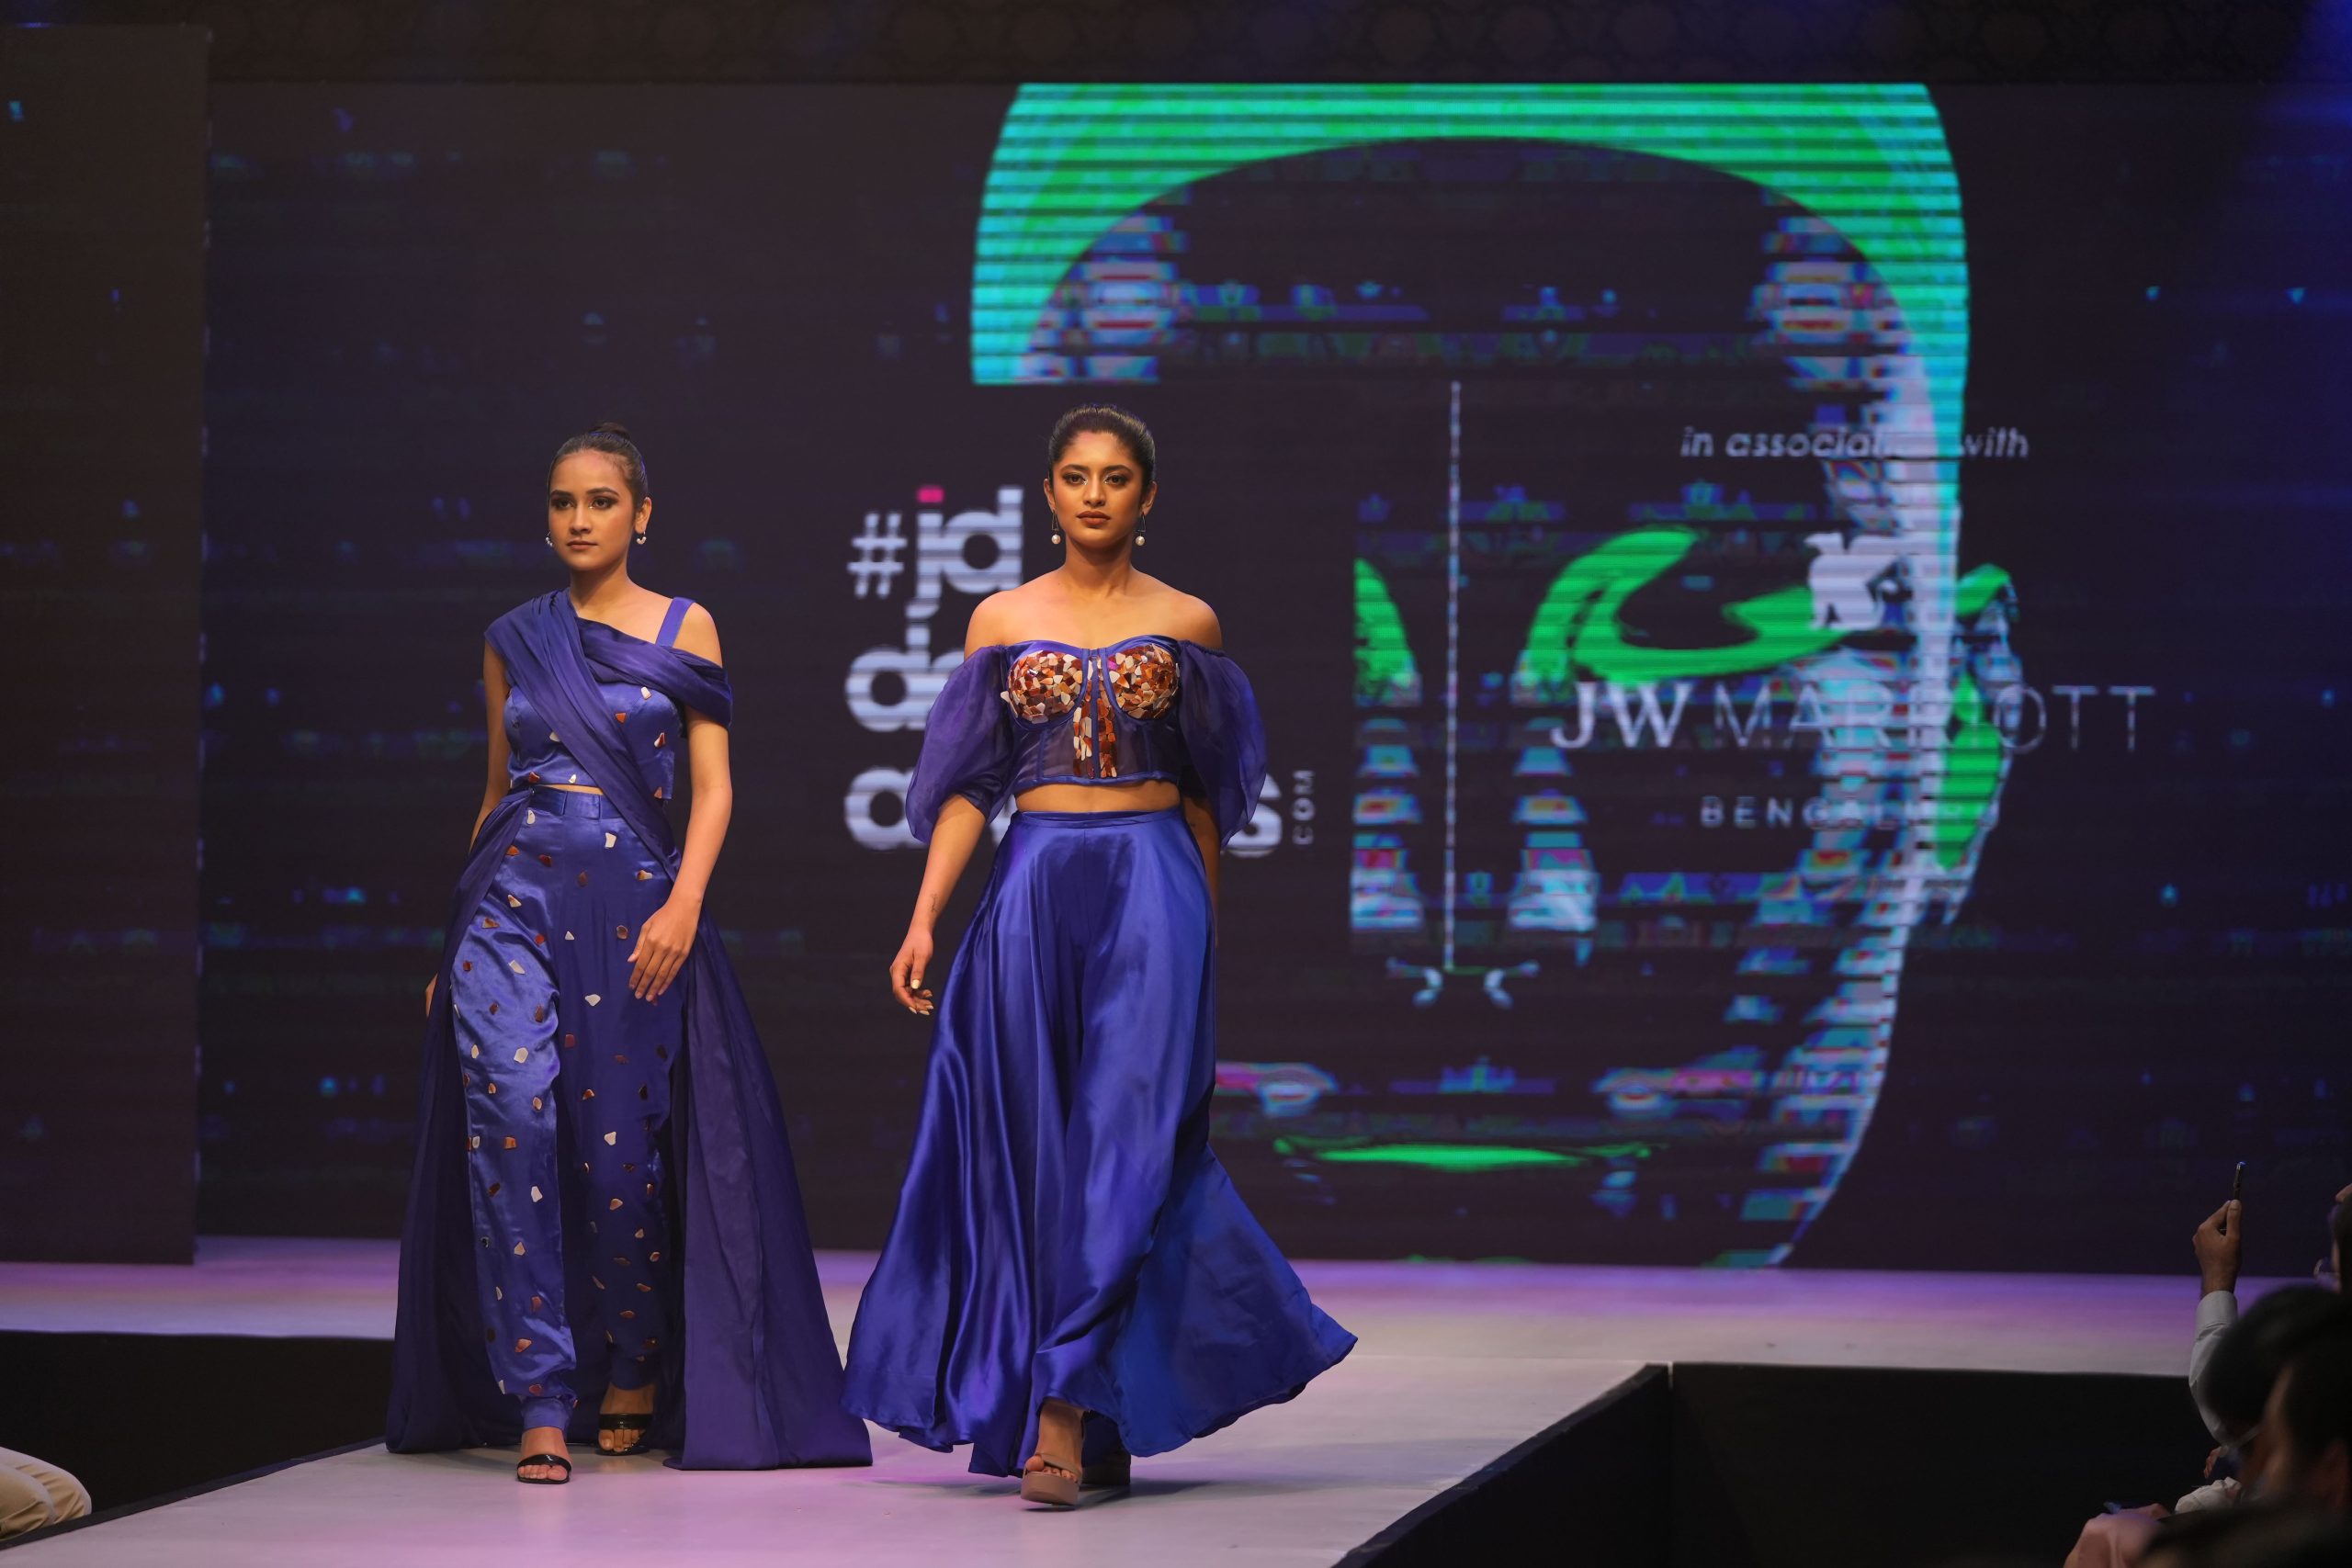 JD Design Awards x JW Marriott Hotel Bengaluru Concludes On A High Note